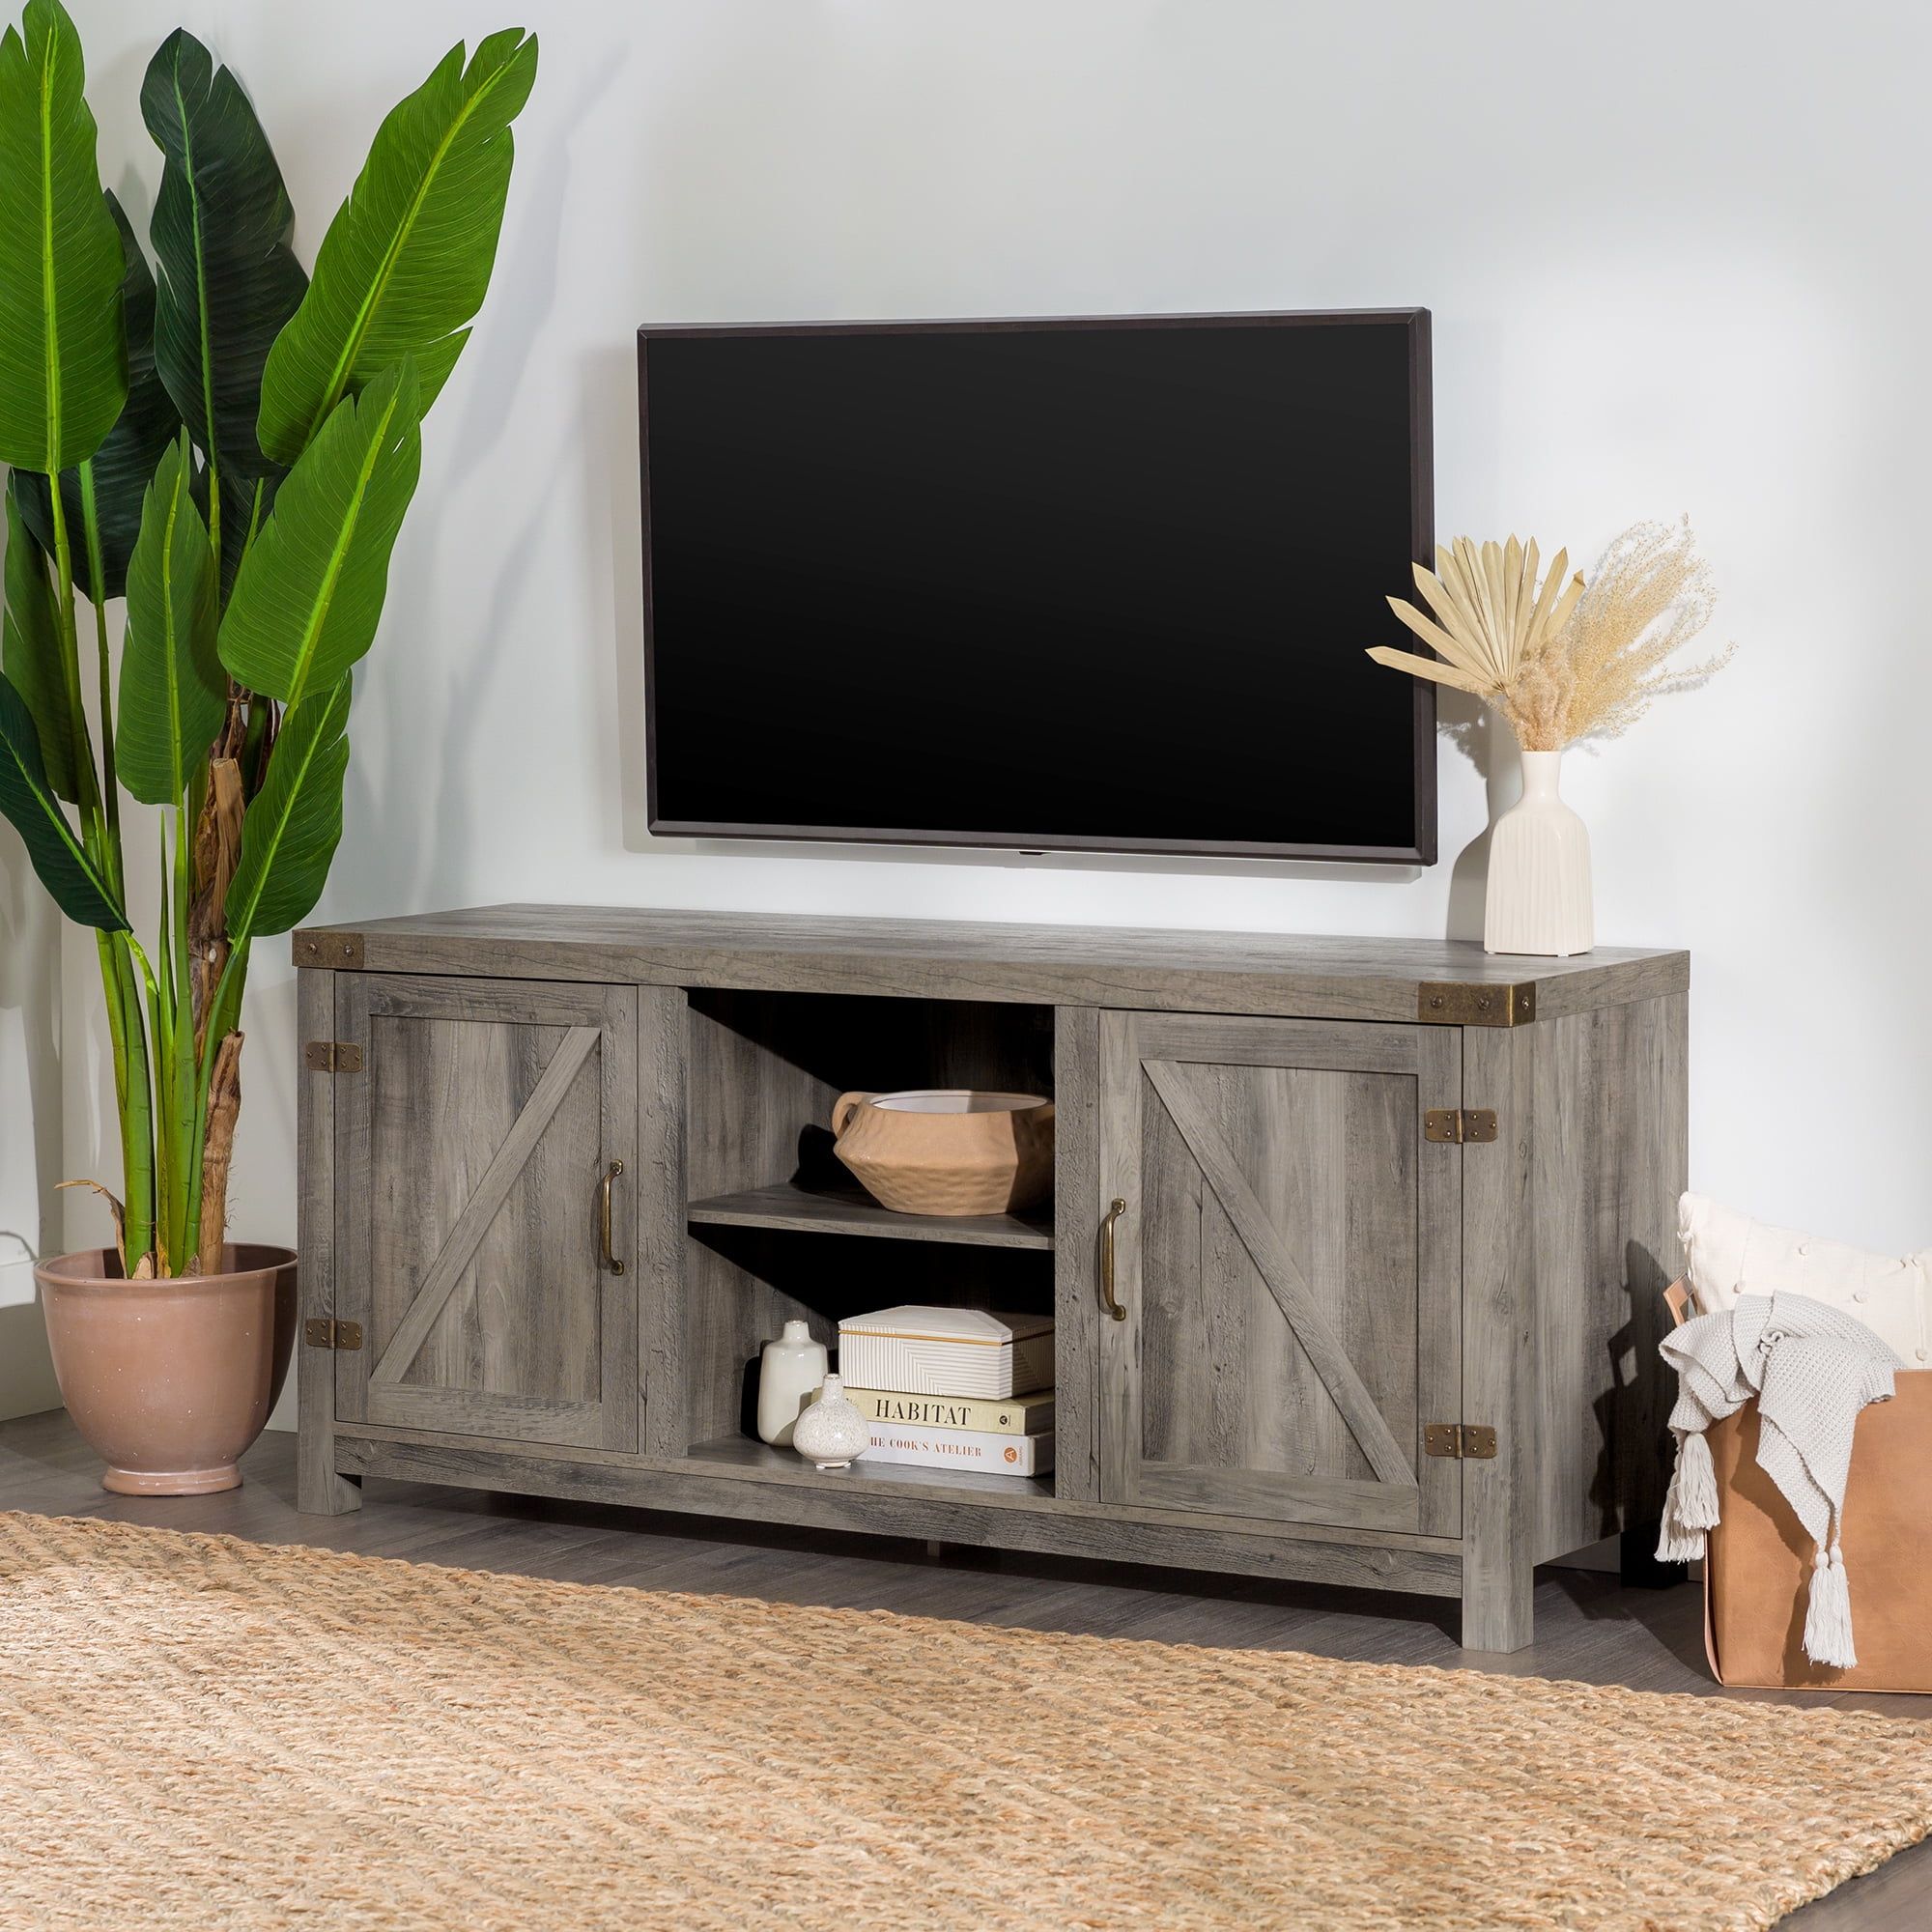 Woven Paths Modern Farmhouse Barn Door Tv Stand For Tvs Up To 65", Grey  Wash – Walmart With Modern Farmhouse Barn Tv Stands (Photo 1 of 15)